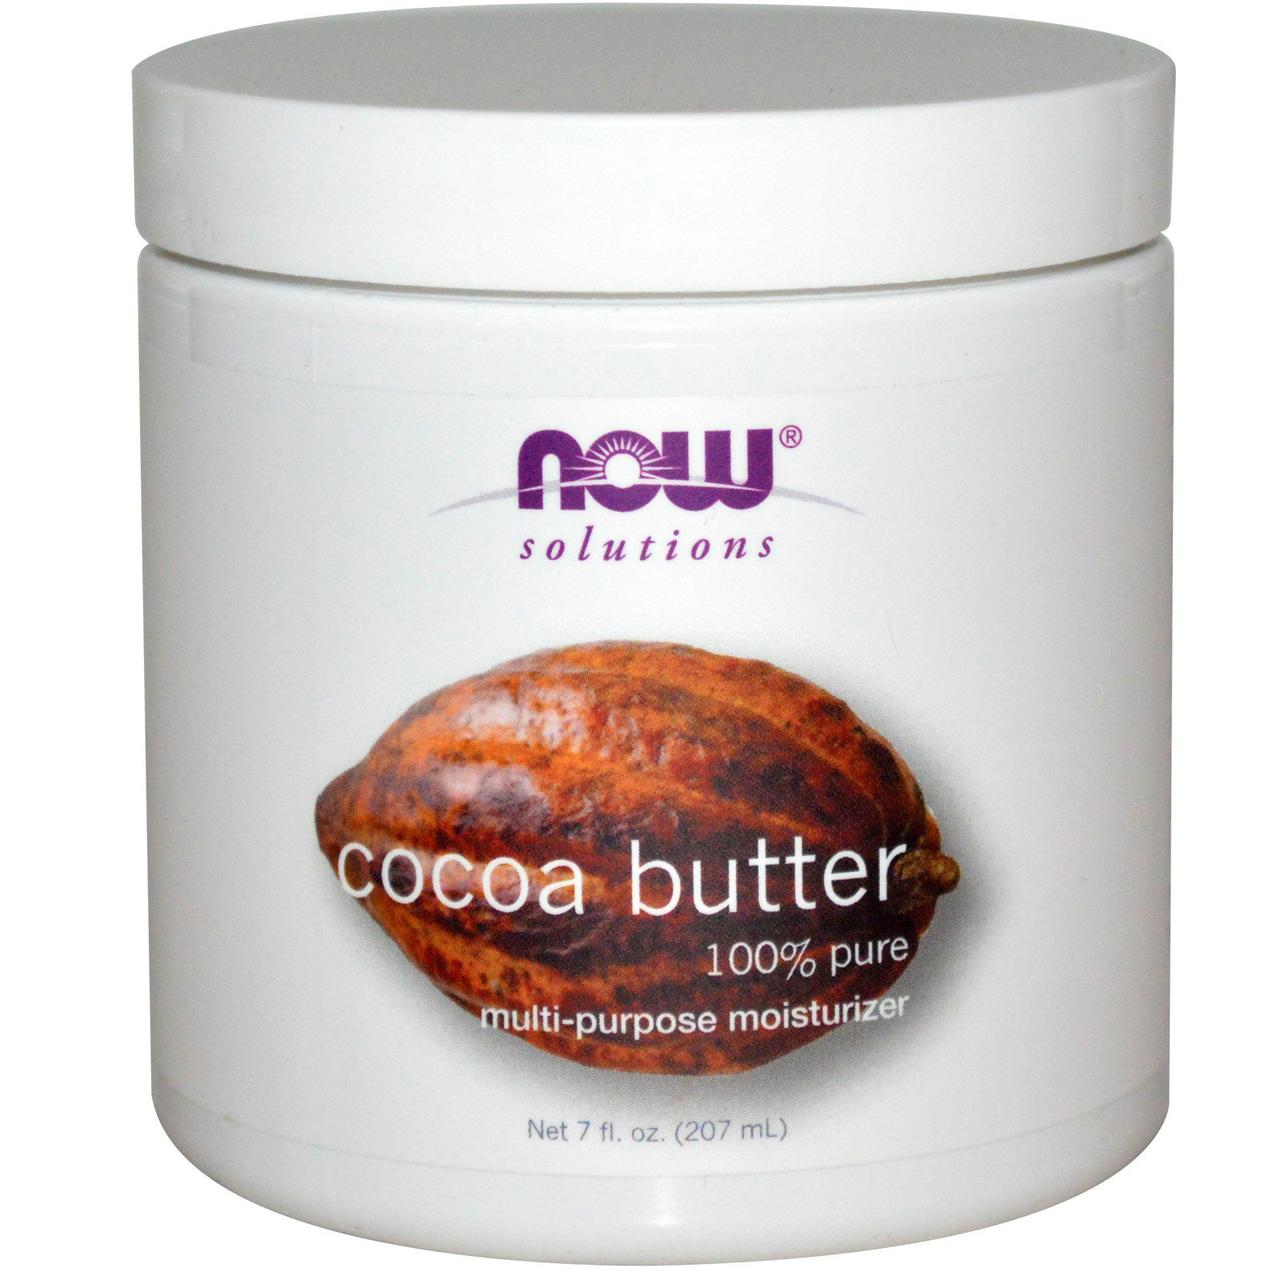 Масло какао 100% натуральне, 207 мл, Now Foods, Solutions, Cocoa Butter